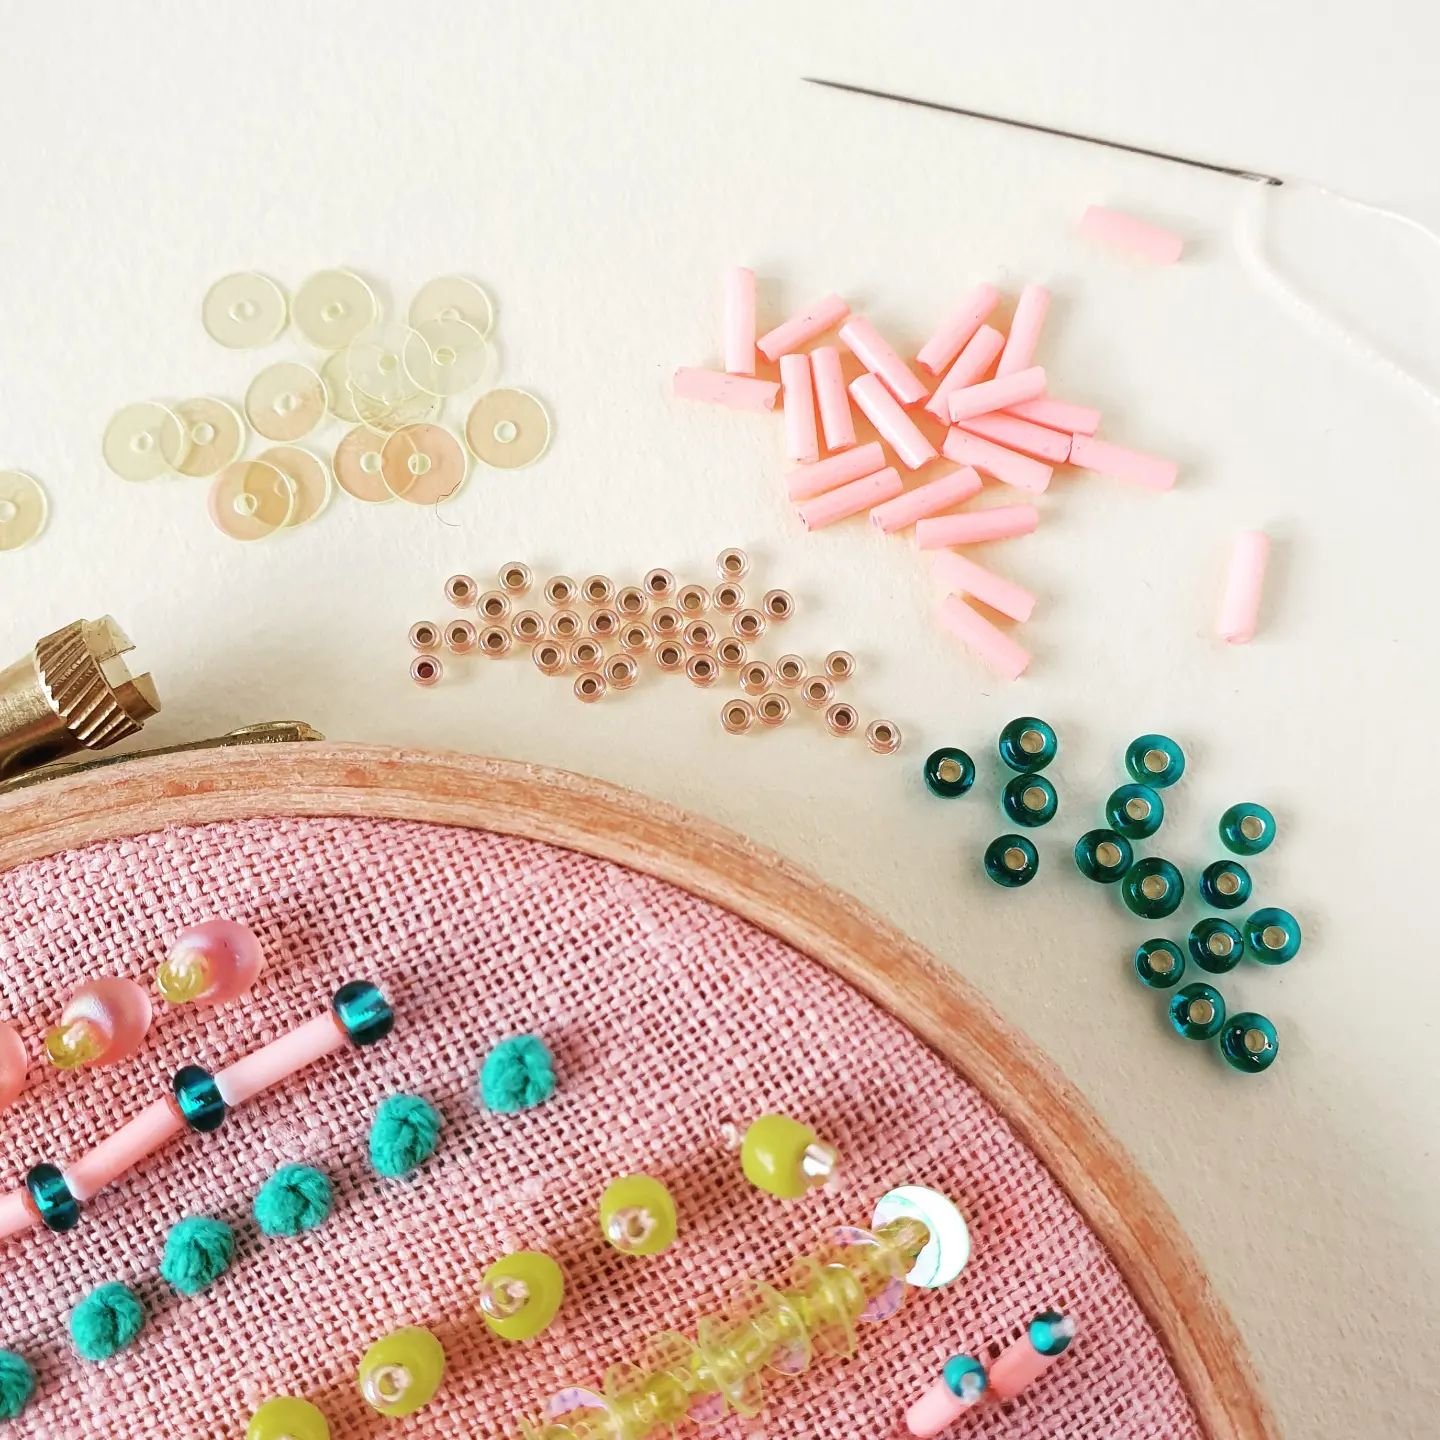 Today is the last day to subscribe and receive our gorgeous beaded embroidery kit as your first box!

Our fun kit teaches you a range of different beading techniques so that once you've finished you can use your new-found skills to decorate clothes, 